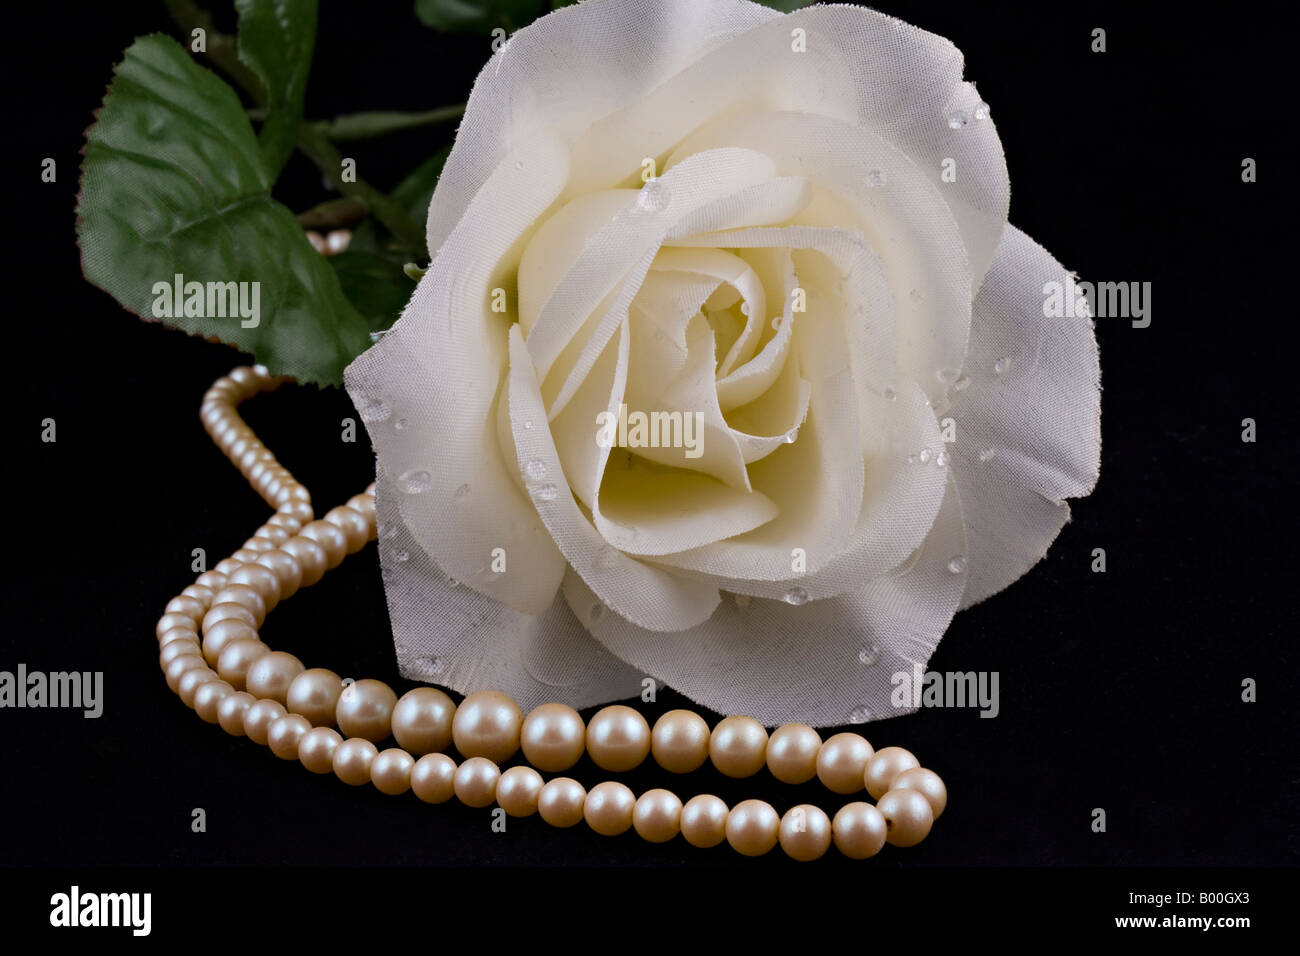 GORGEOUS FLOWER WHITE OYSTER MOTHER OF PEARL SHELL BLACK ROPE necklace 